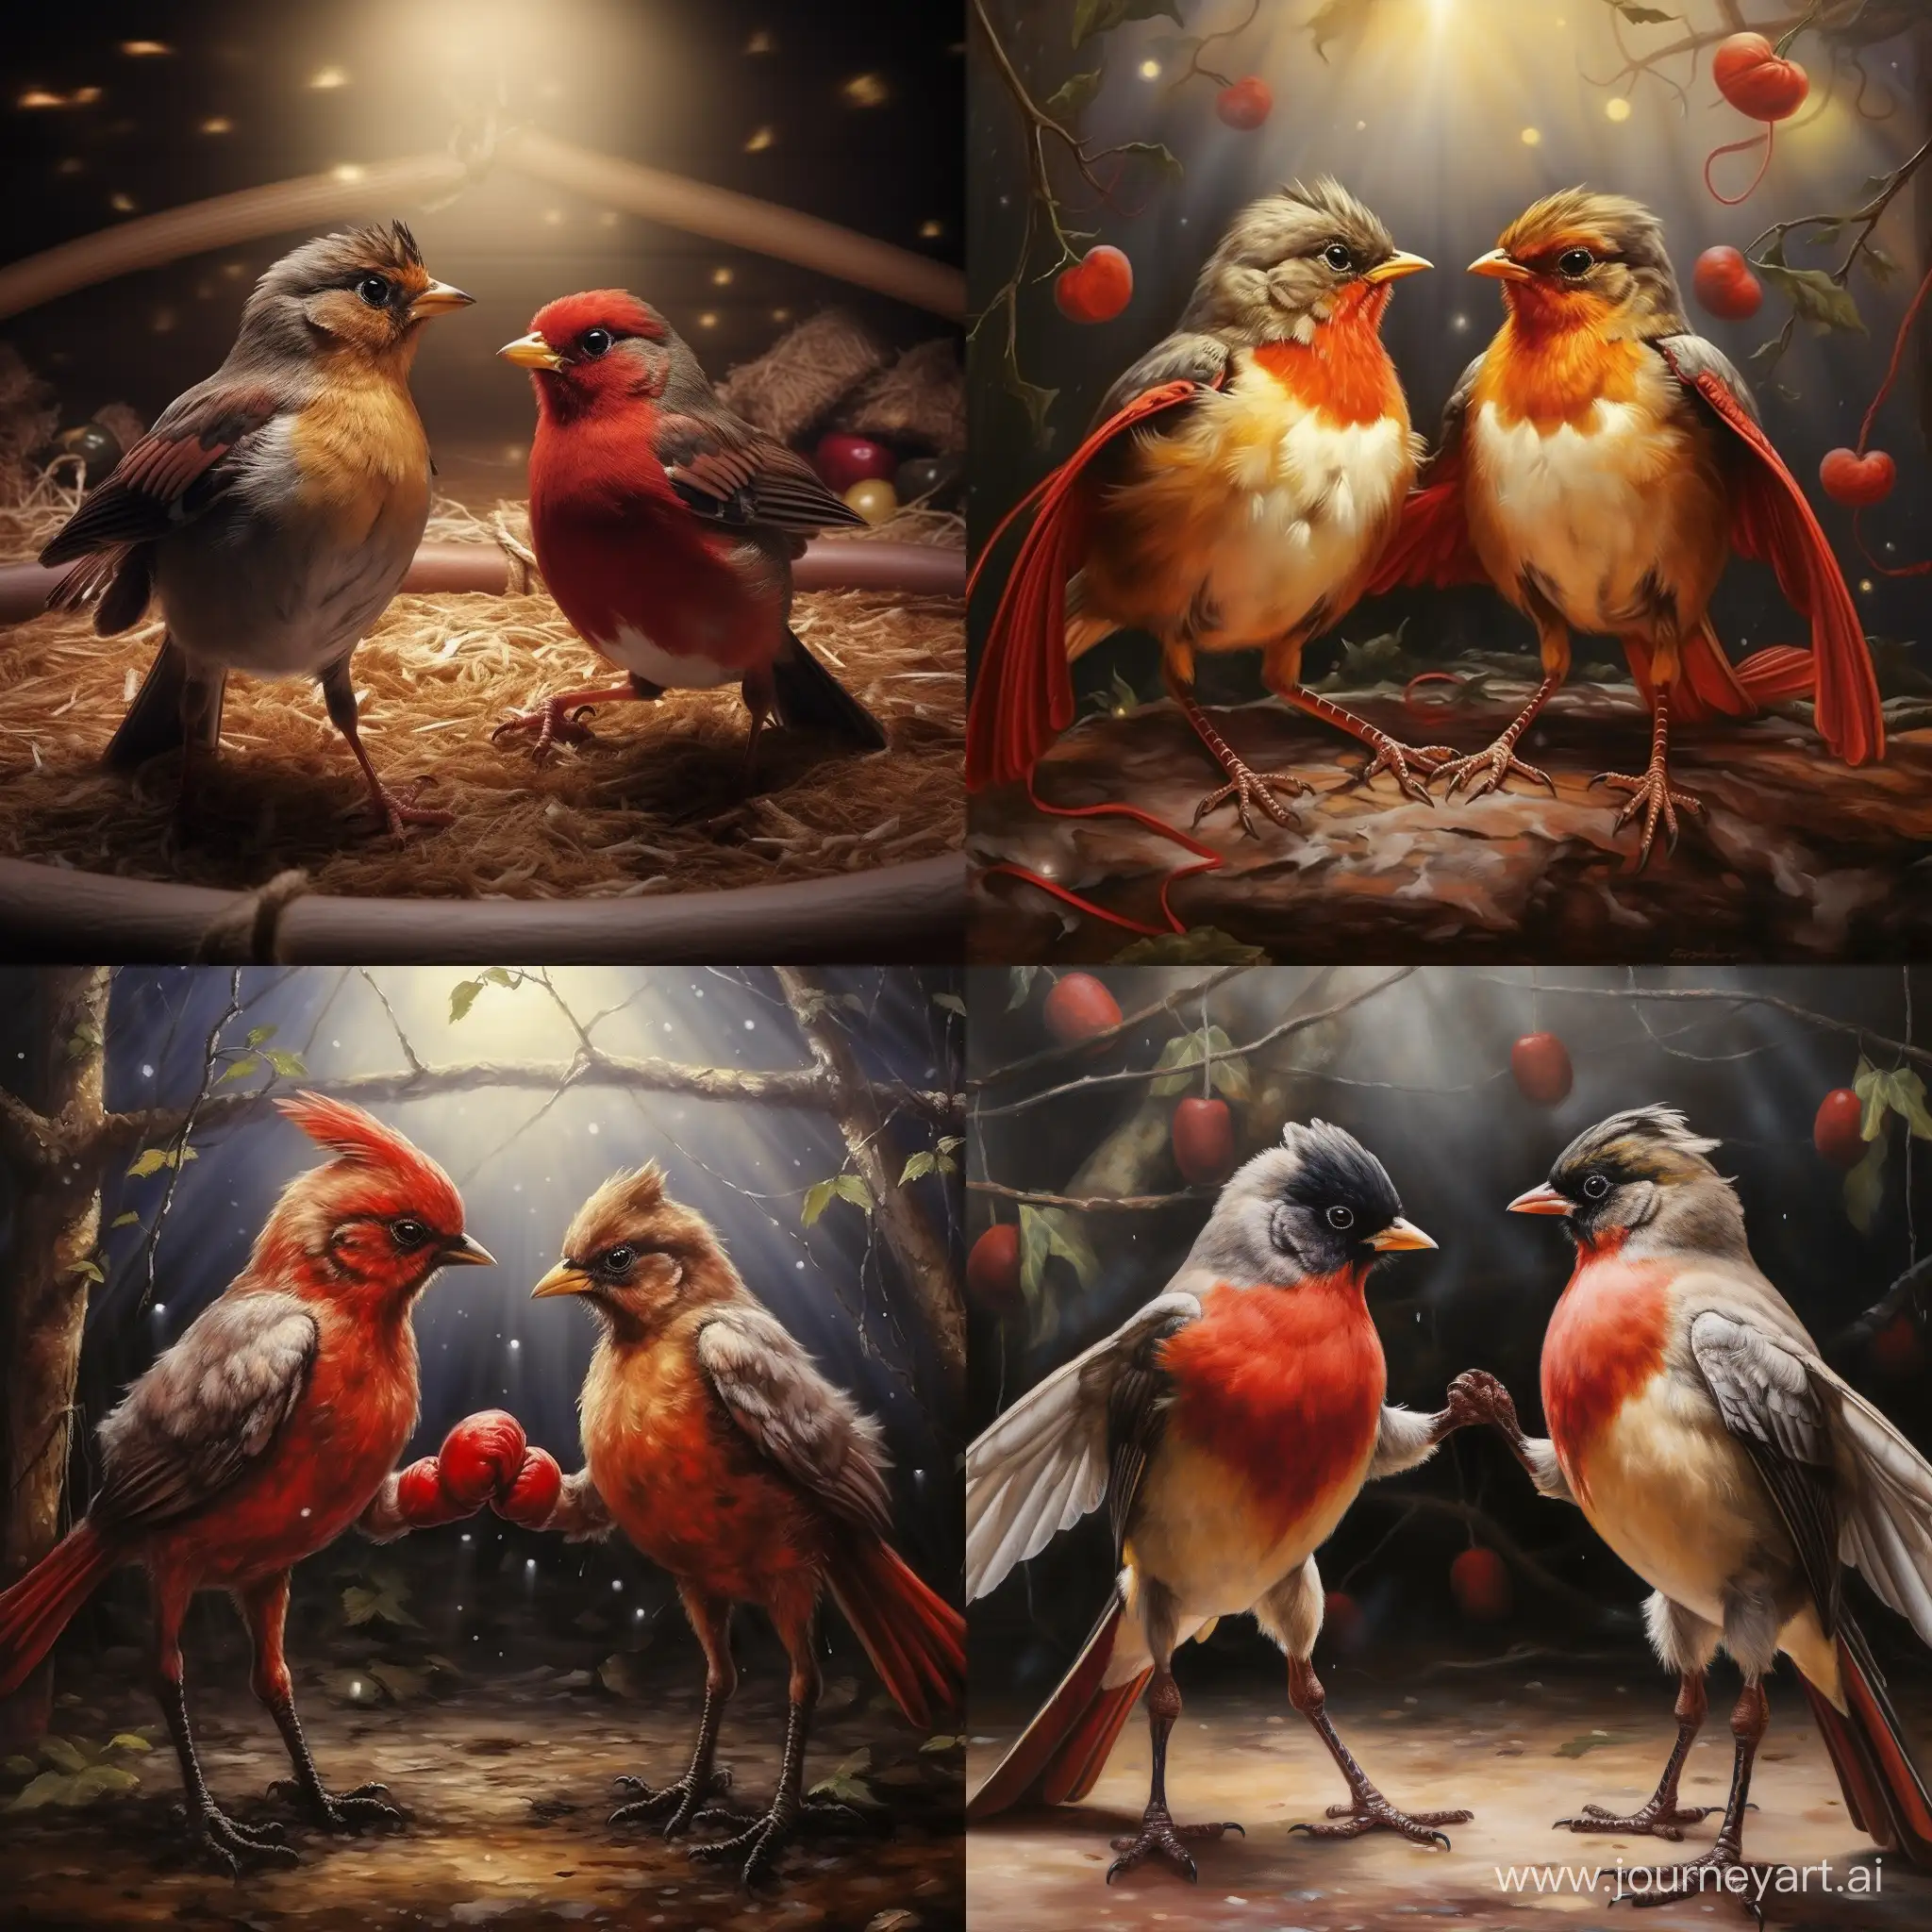 Boxing-Red-Robins-in-a-11-Aspect-Ratio